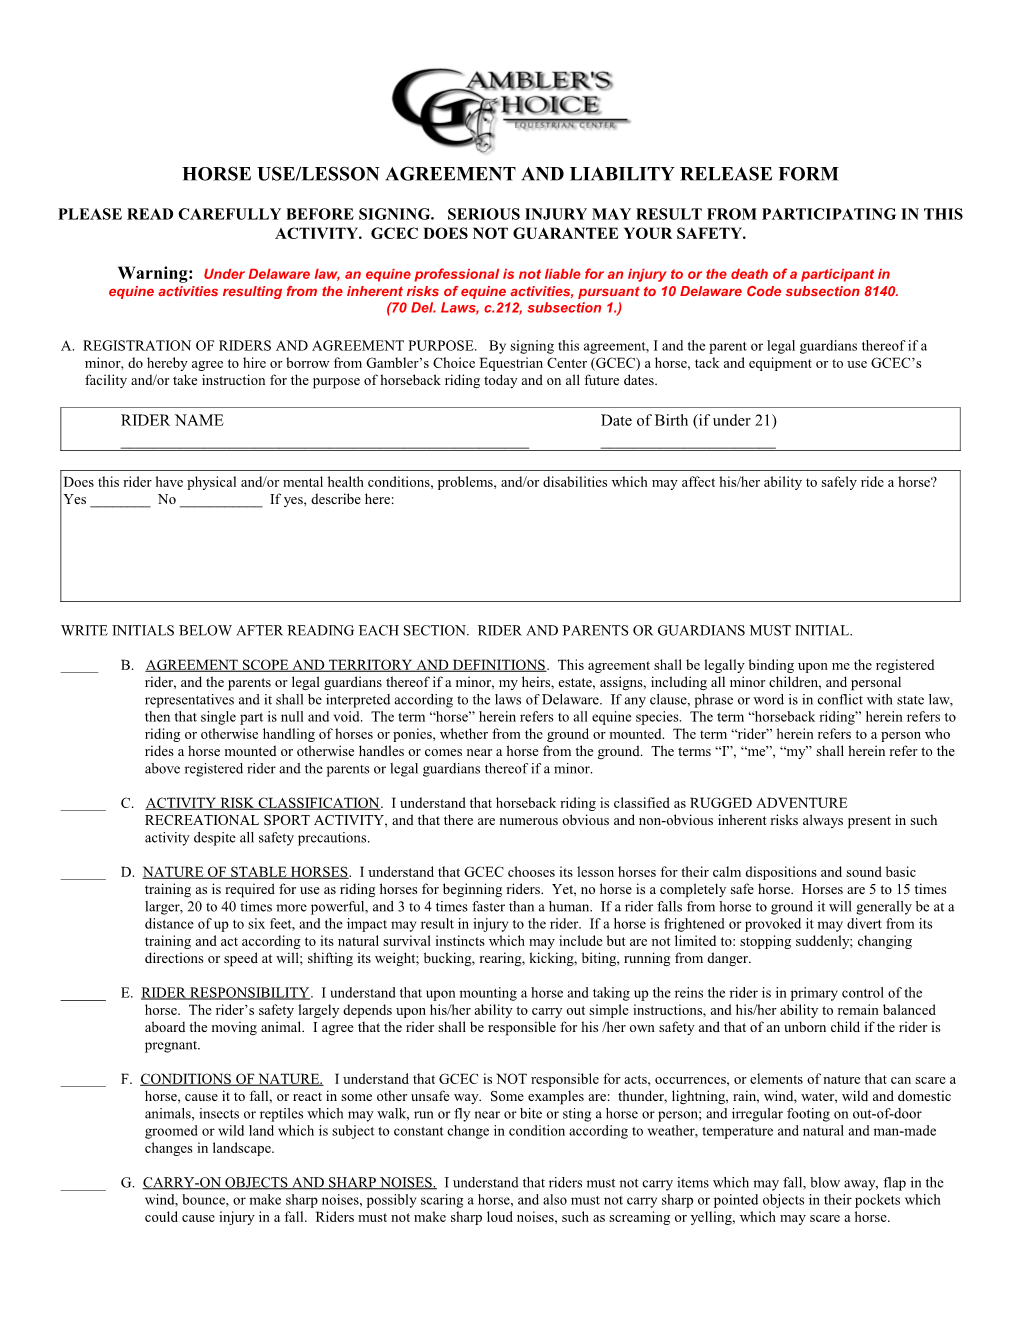 Horse Use/Lesson Agreement and Liability Release Form